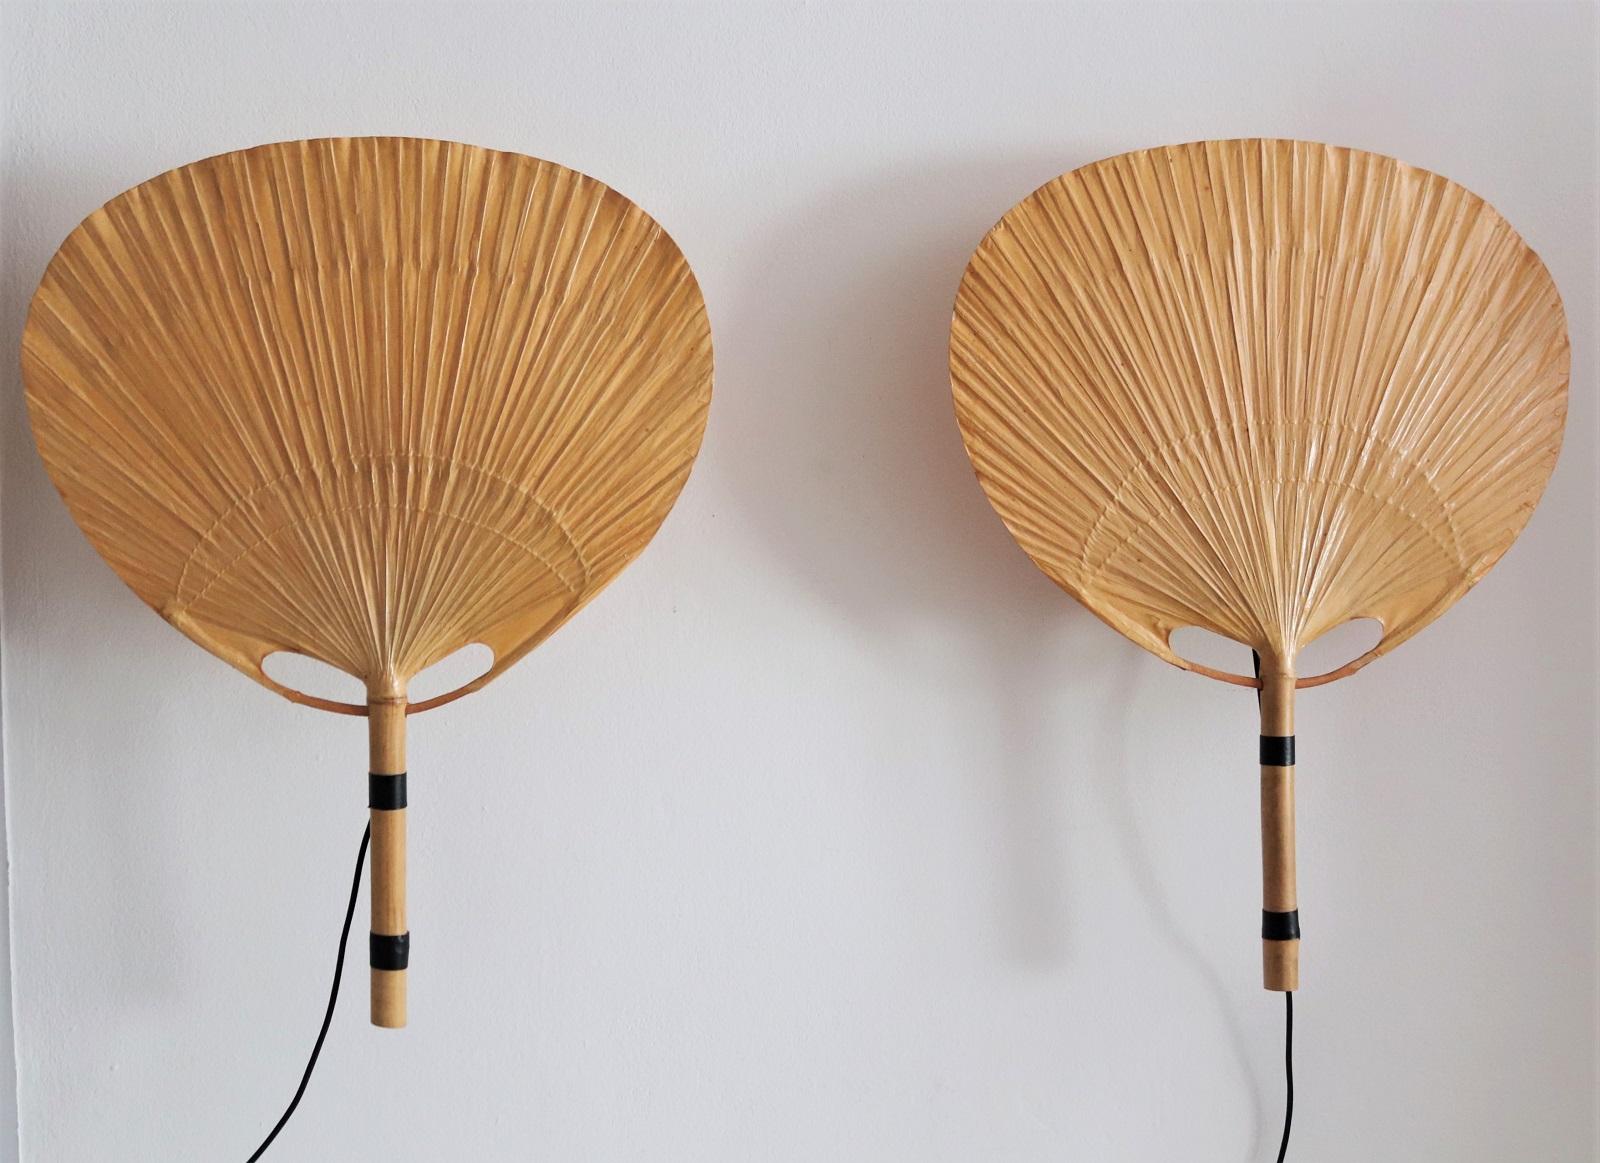 Two pieces of big vintage Uchiwa fan lamps with metal holder for wall hanging.
Designed from Ingo Maurer, Germany in 1973.
All fans are handmade of bamboo and Japanese rice paper.
The metal holders are equipped with original Edison bulb holders